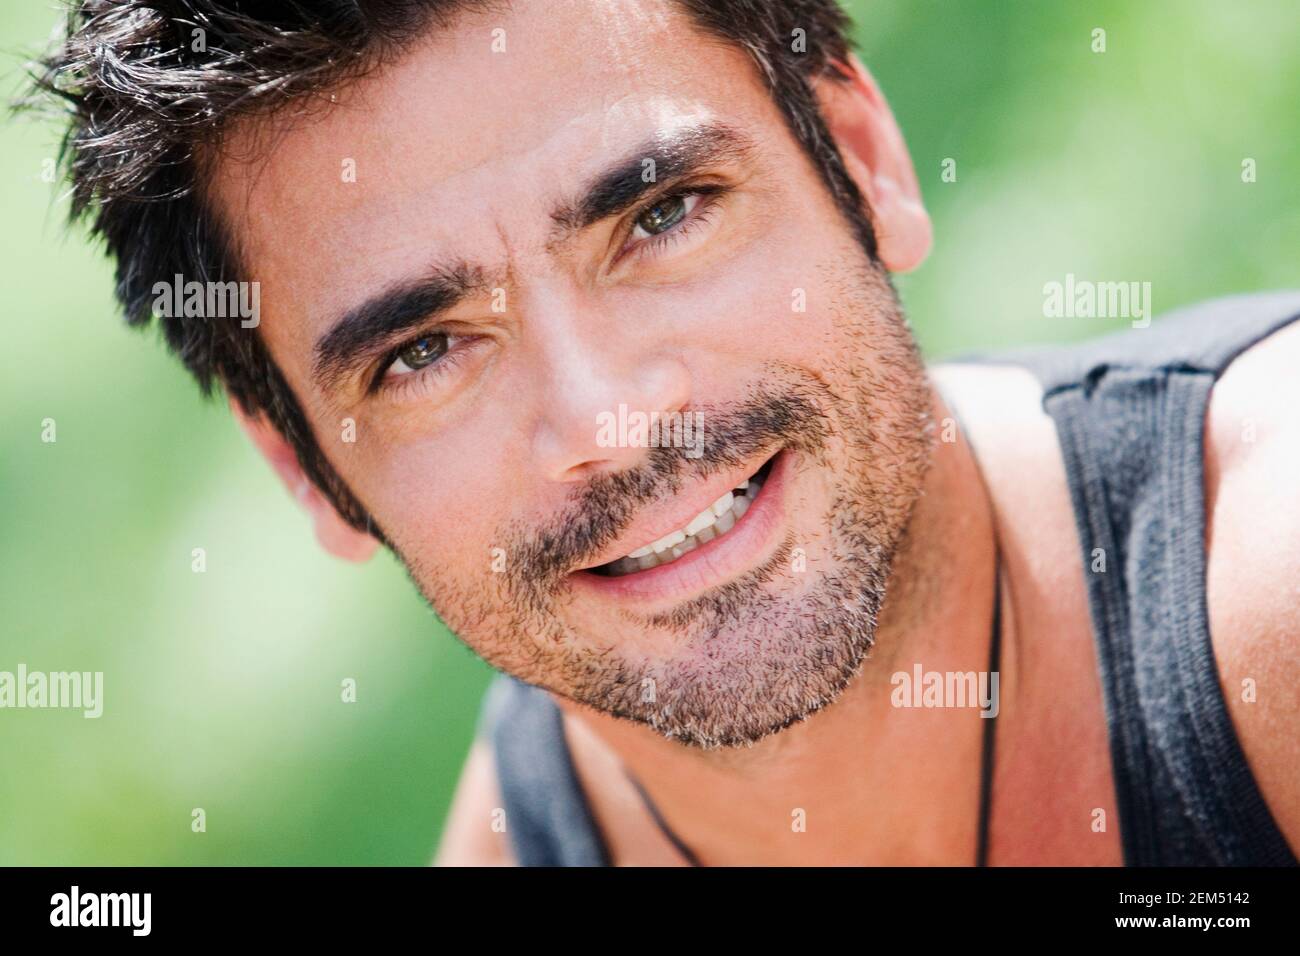 Portrait of a mid adult man smiling Stock Photo